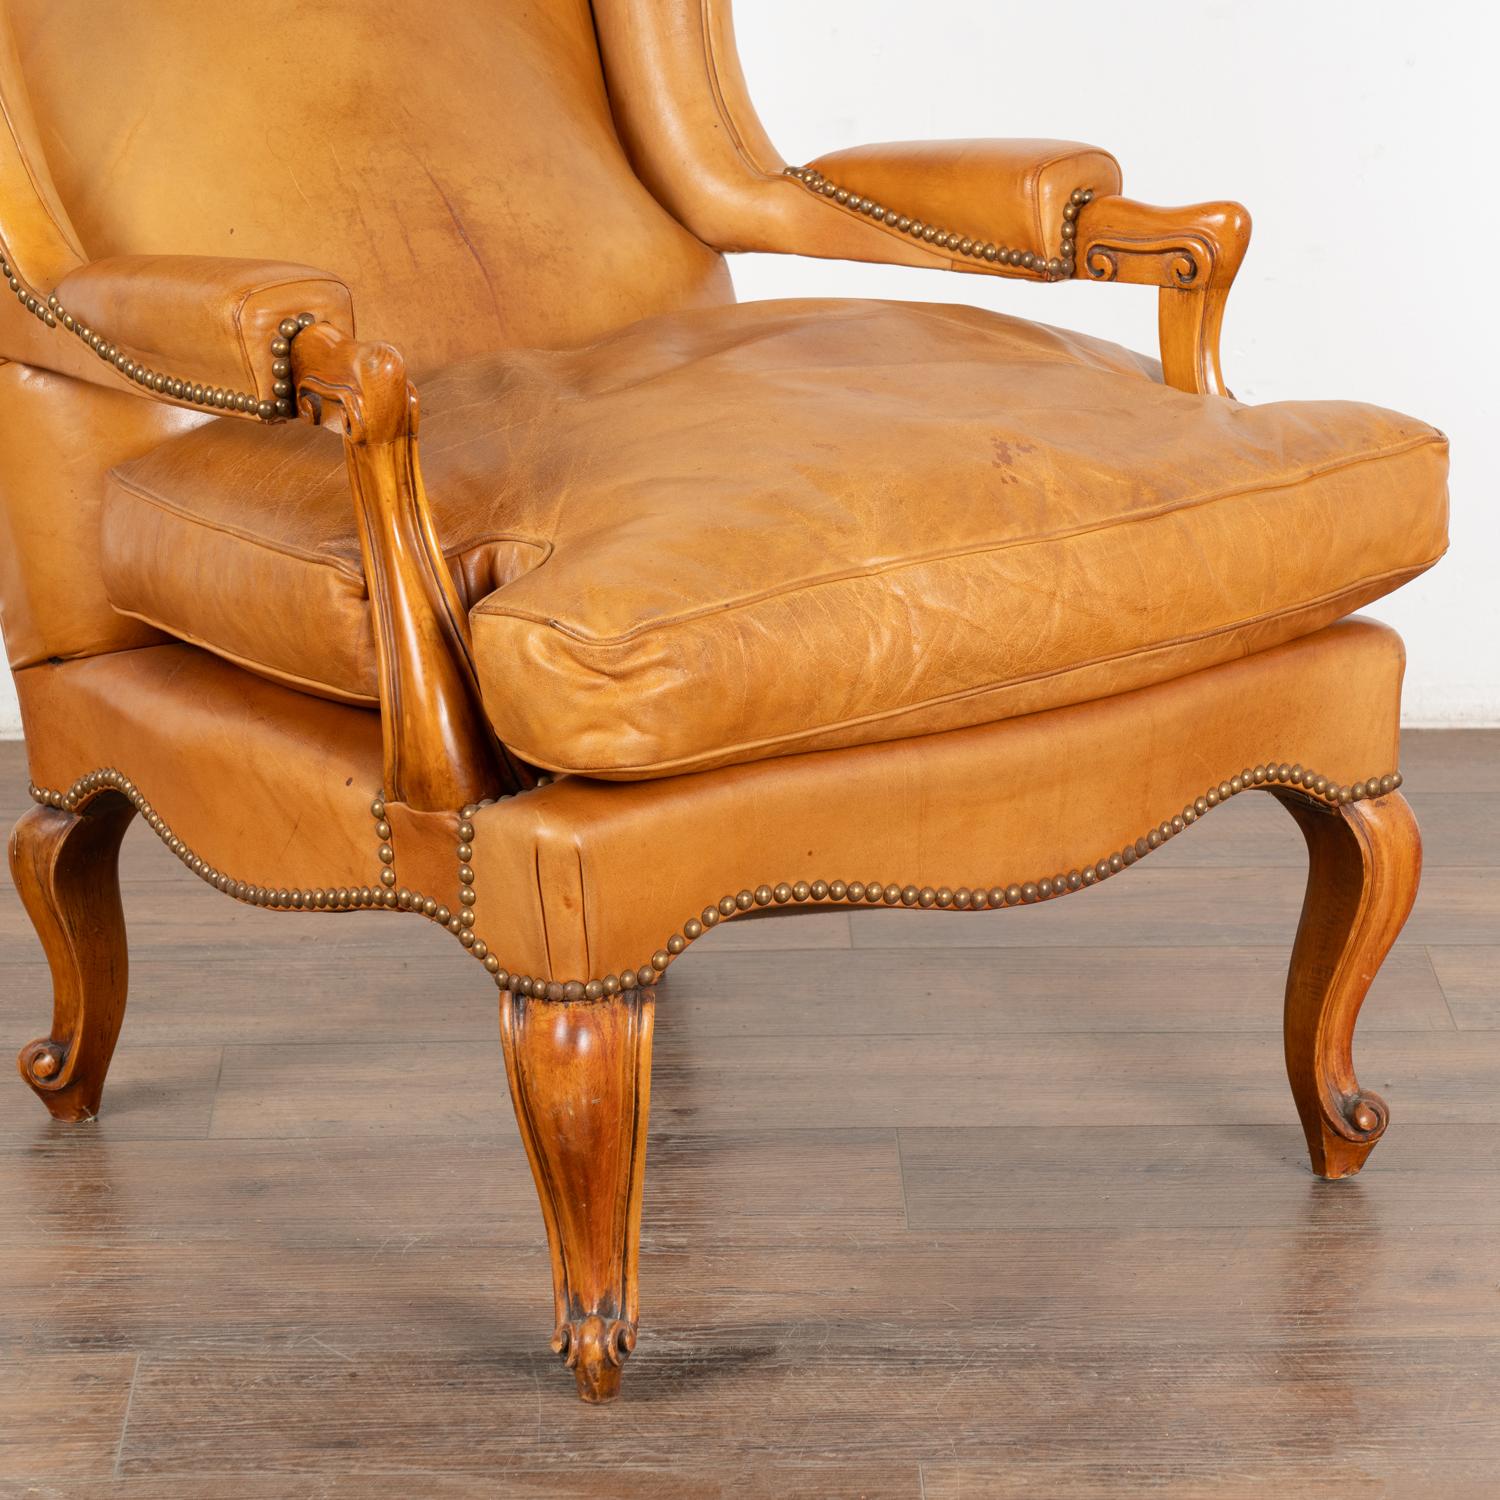 Vintage Camel Colored Leather Wingback Armchair, Denmark circa 1940 For Sale 1